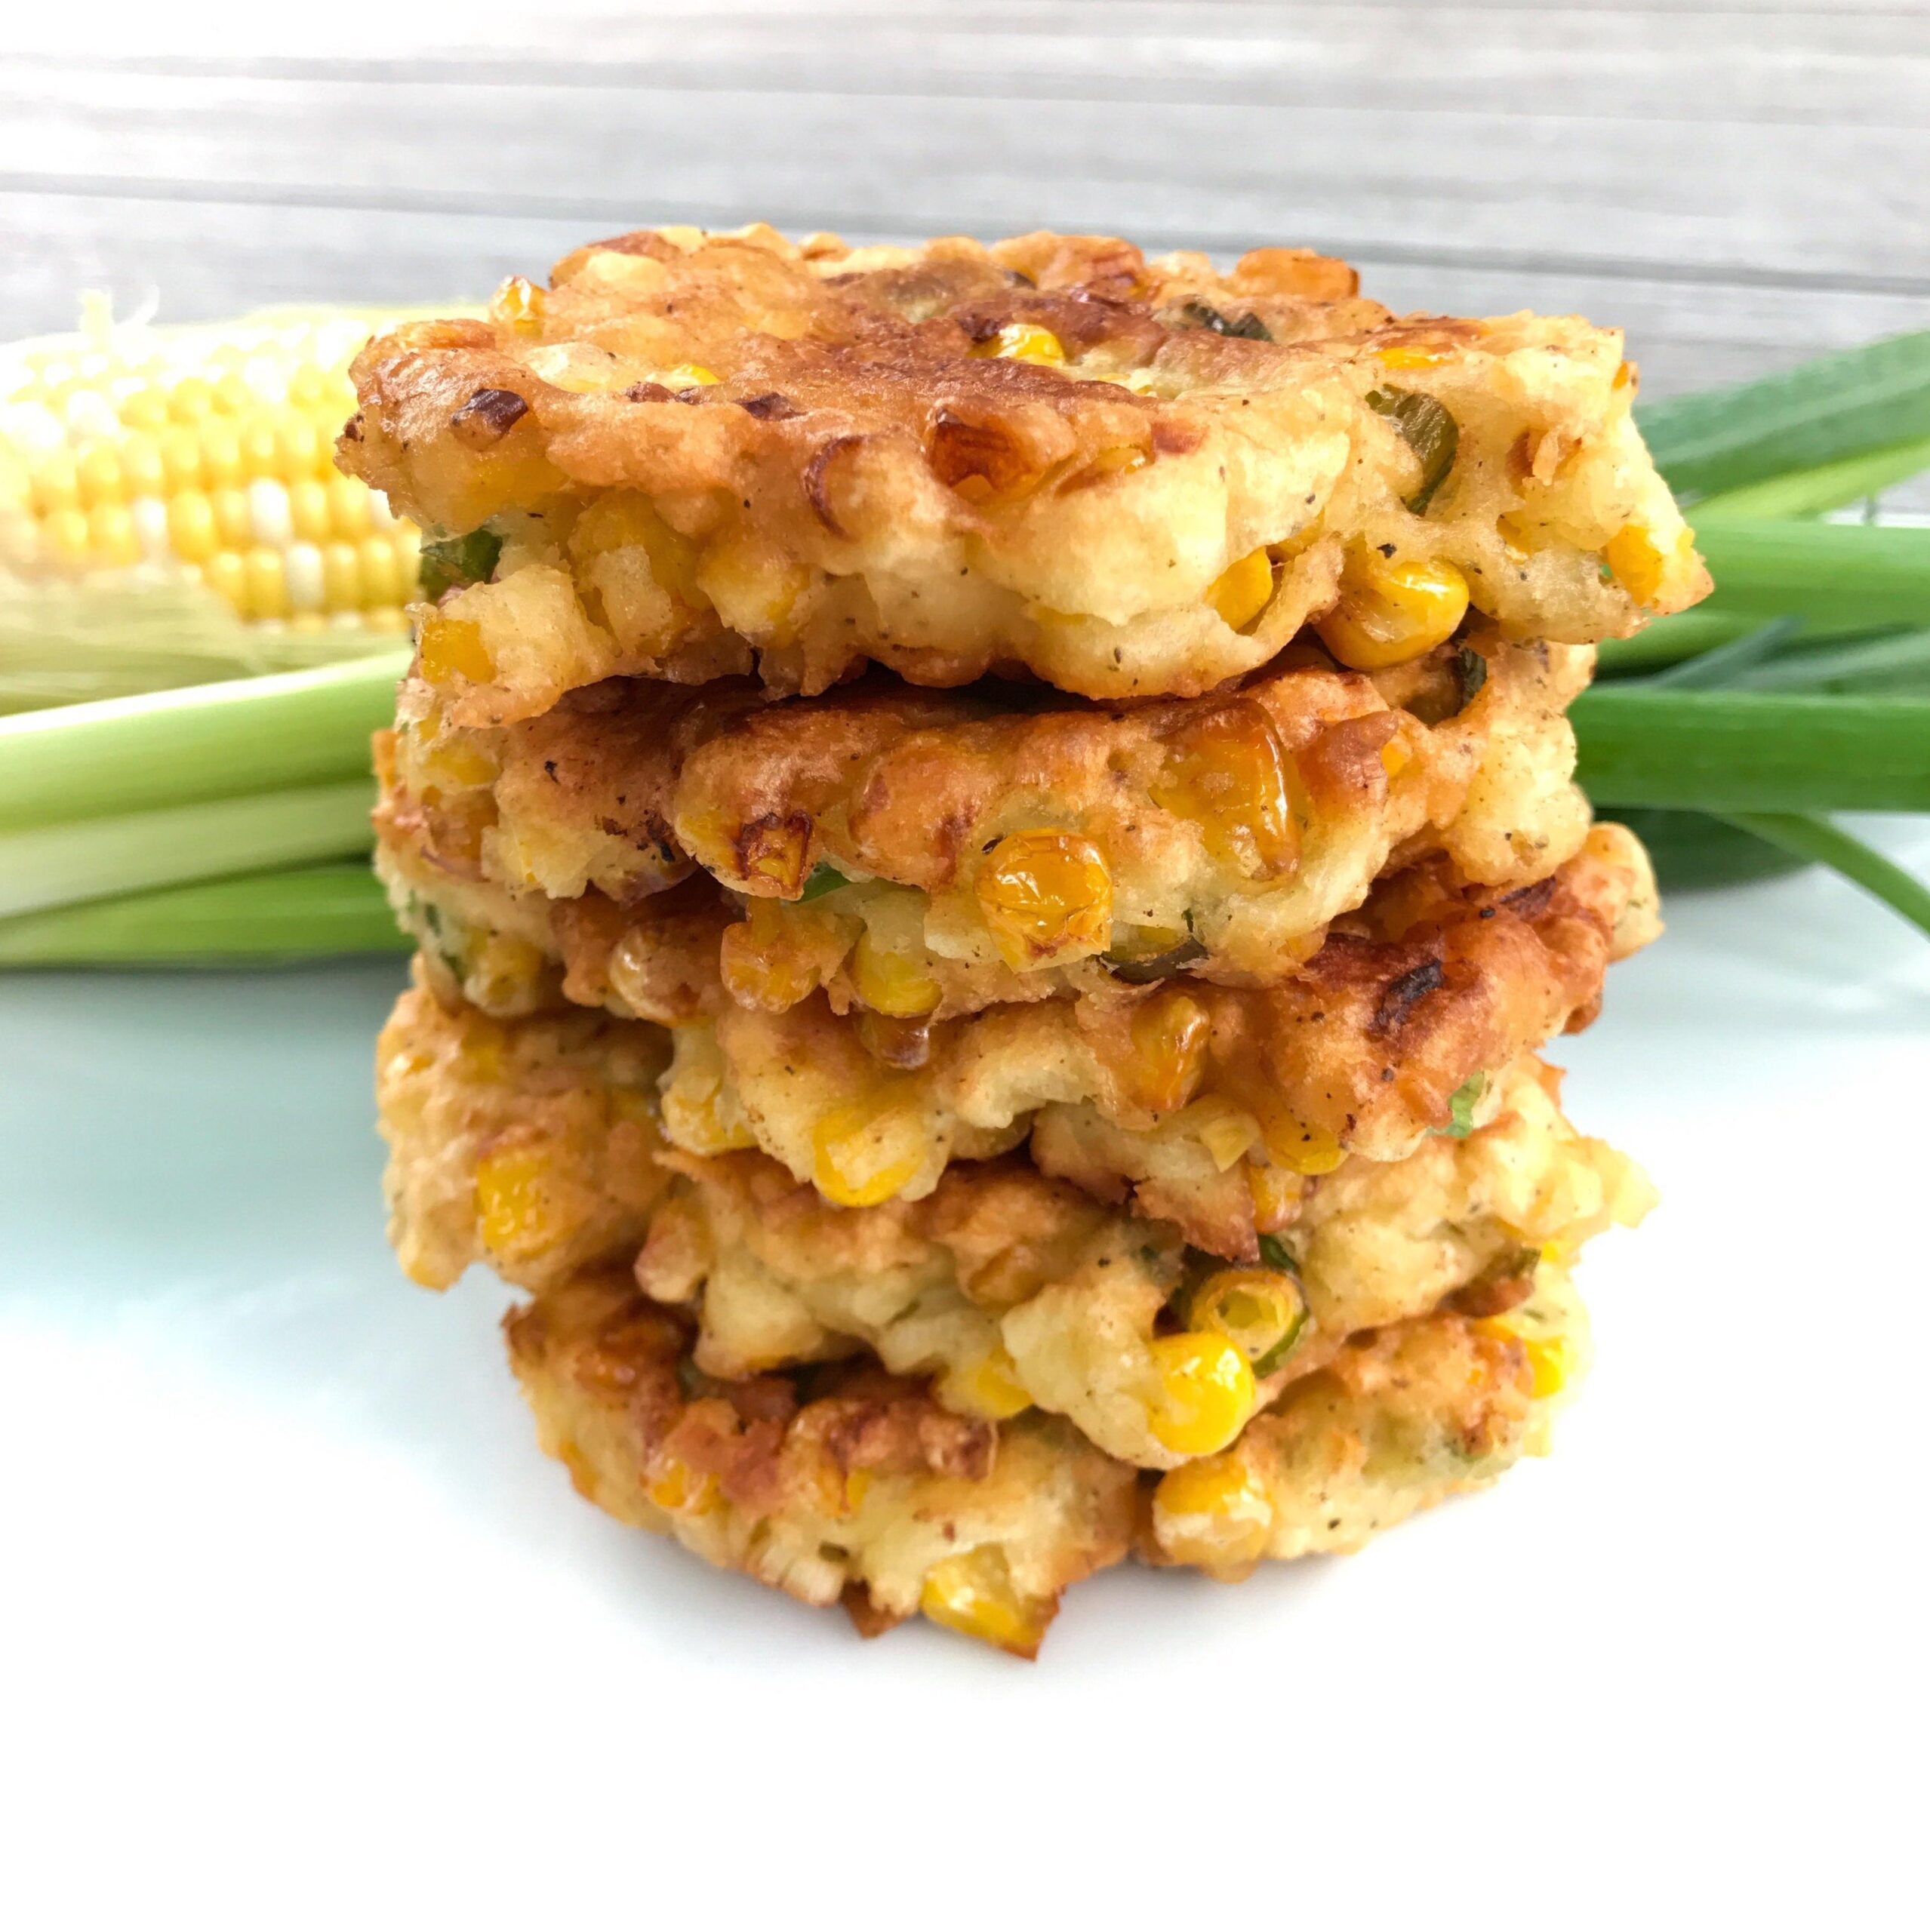  These fritters are made for fall - the perfect balance of corn and cranberry flavors.